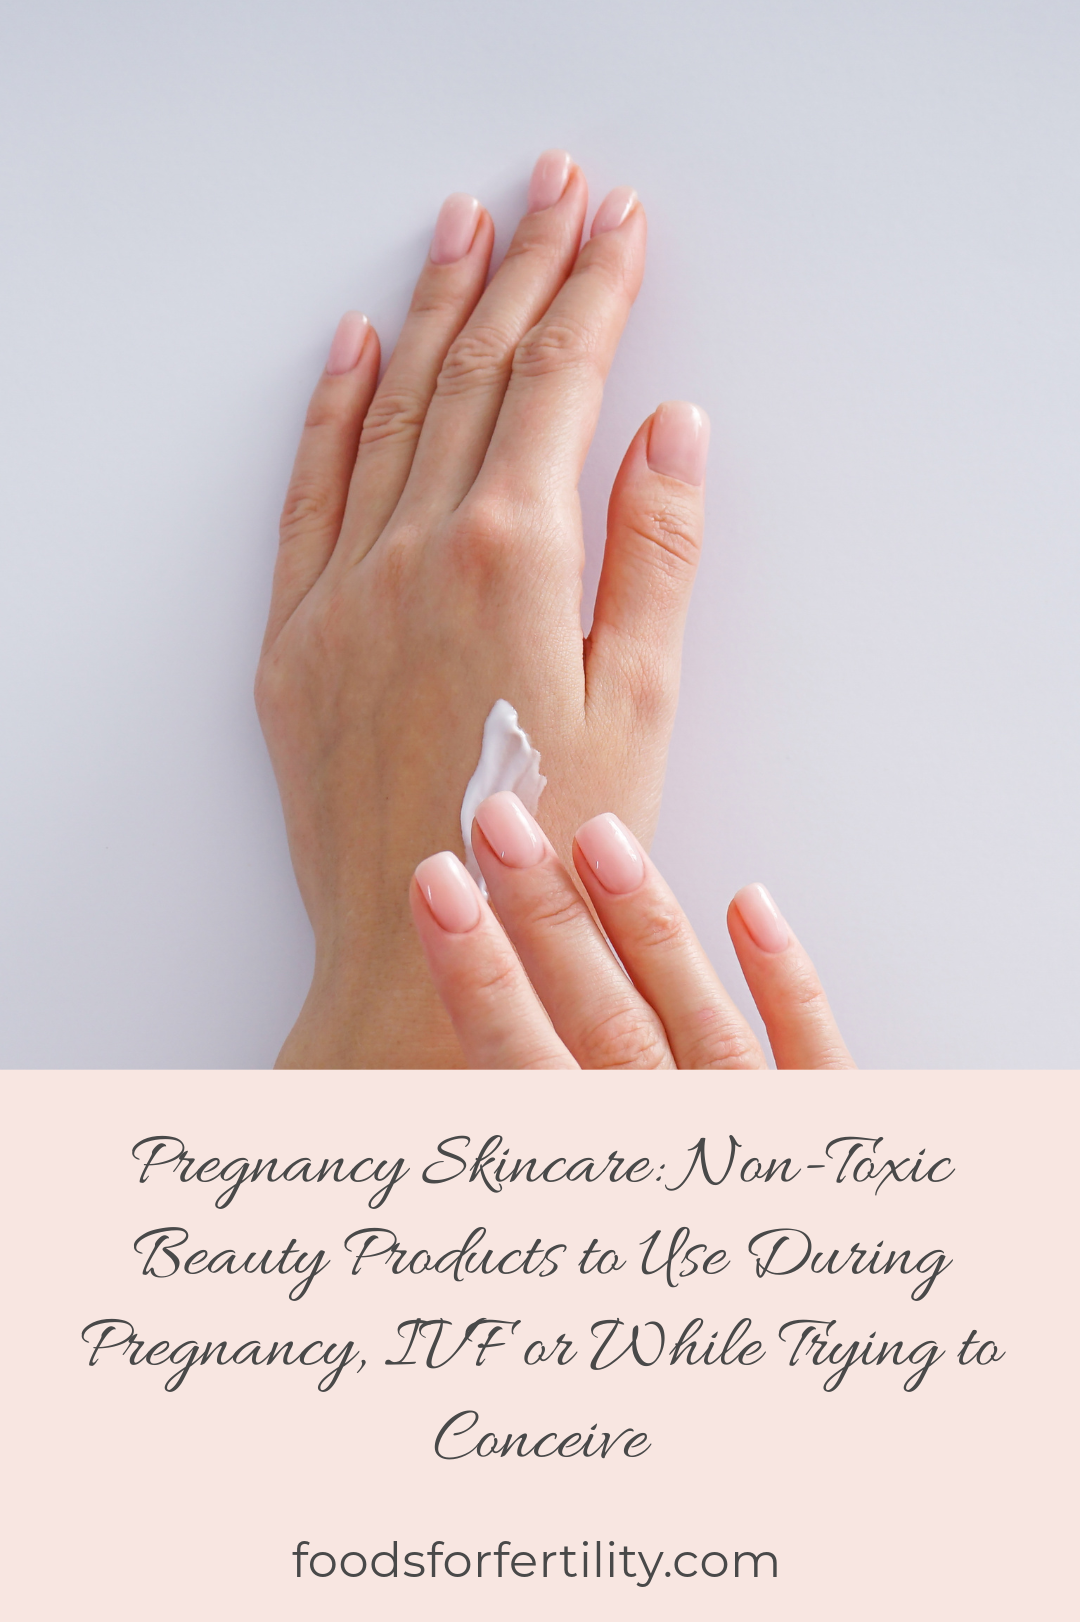 Pregnancy Skincare: Non-Toxic Beauty Products to Use During Pregnancy, IVF or While Trying to Conceive